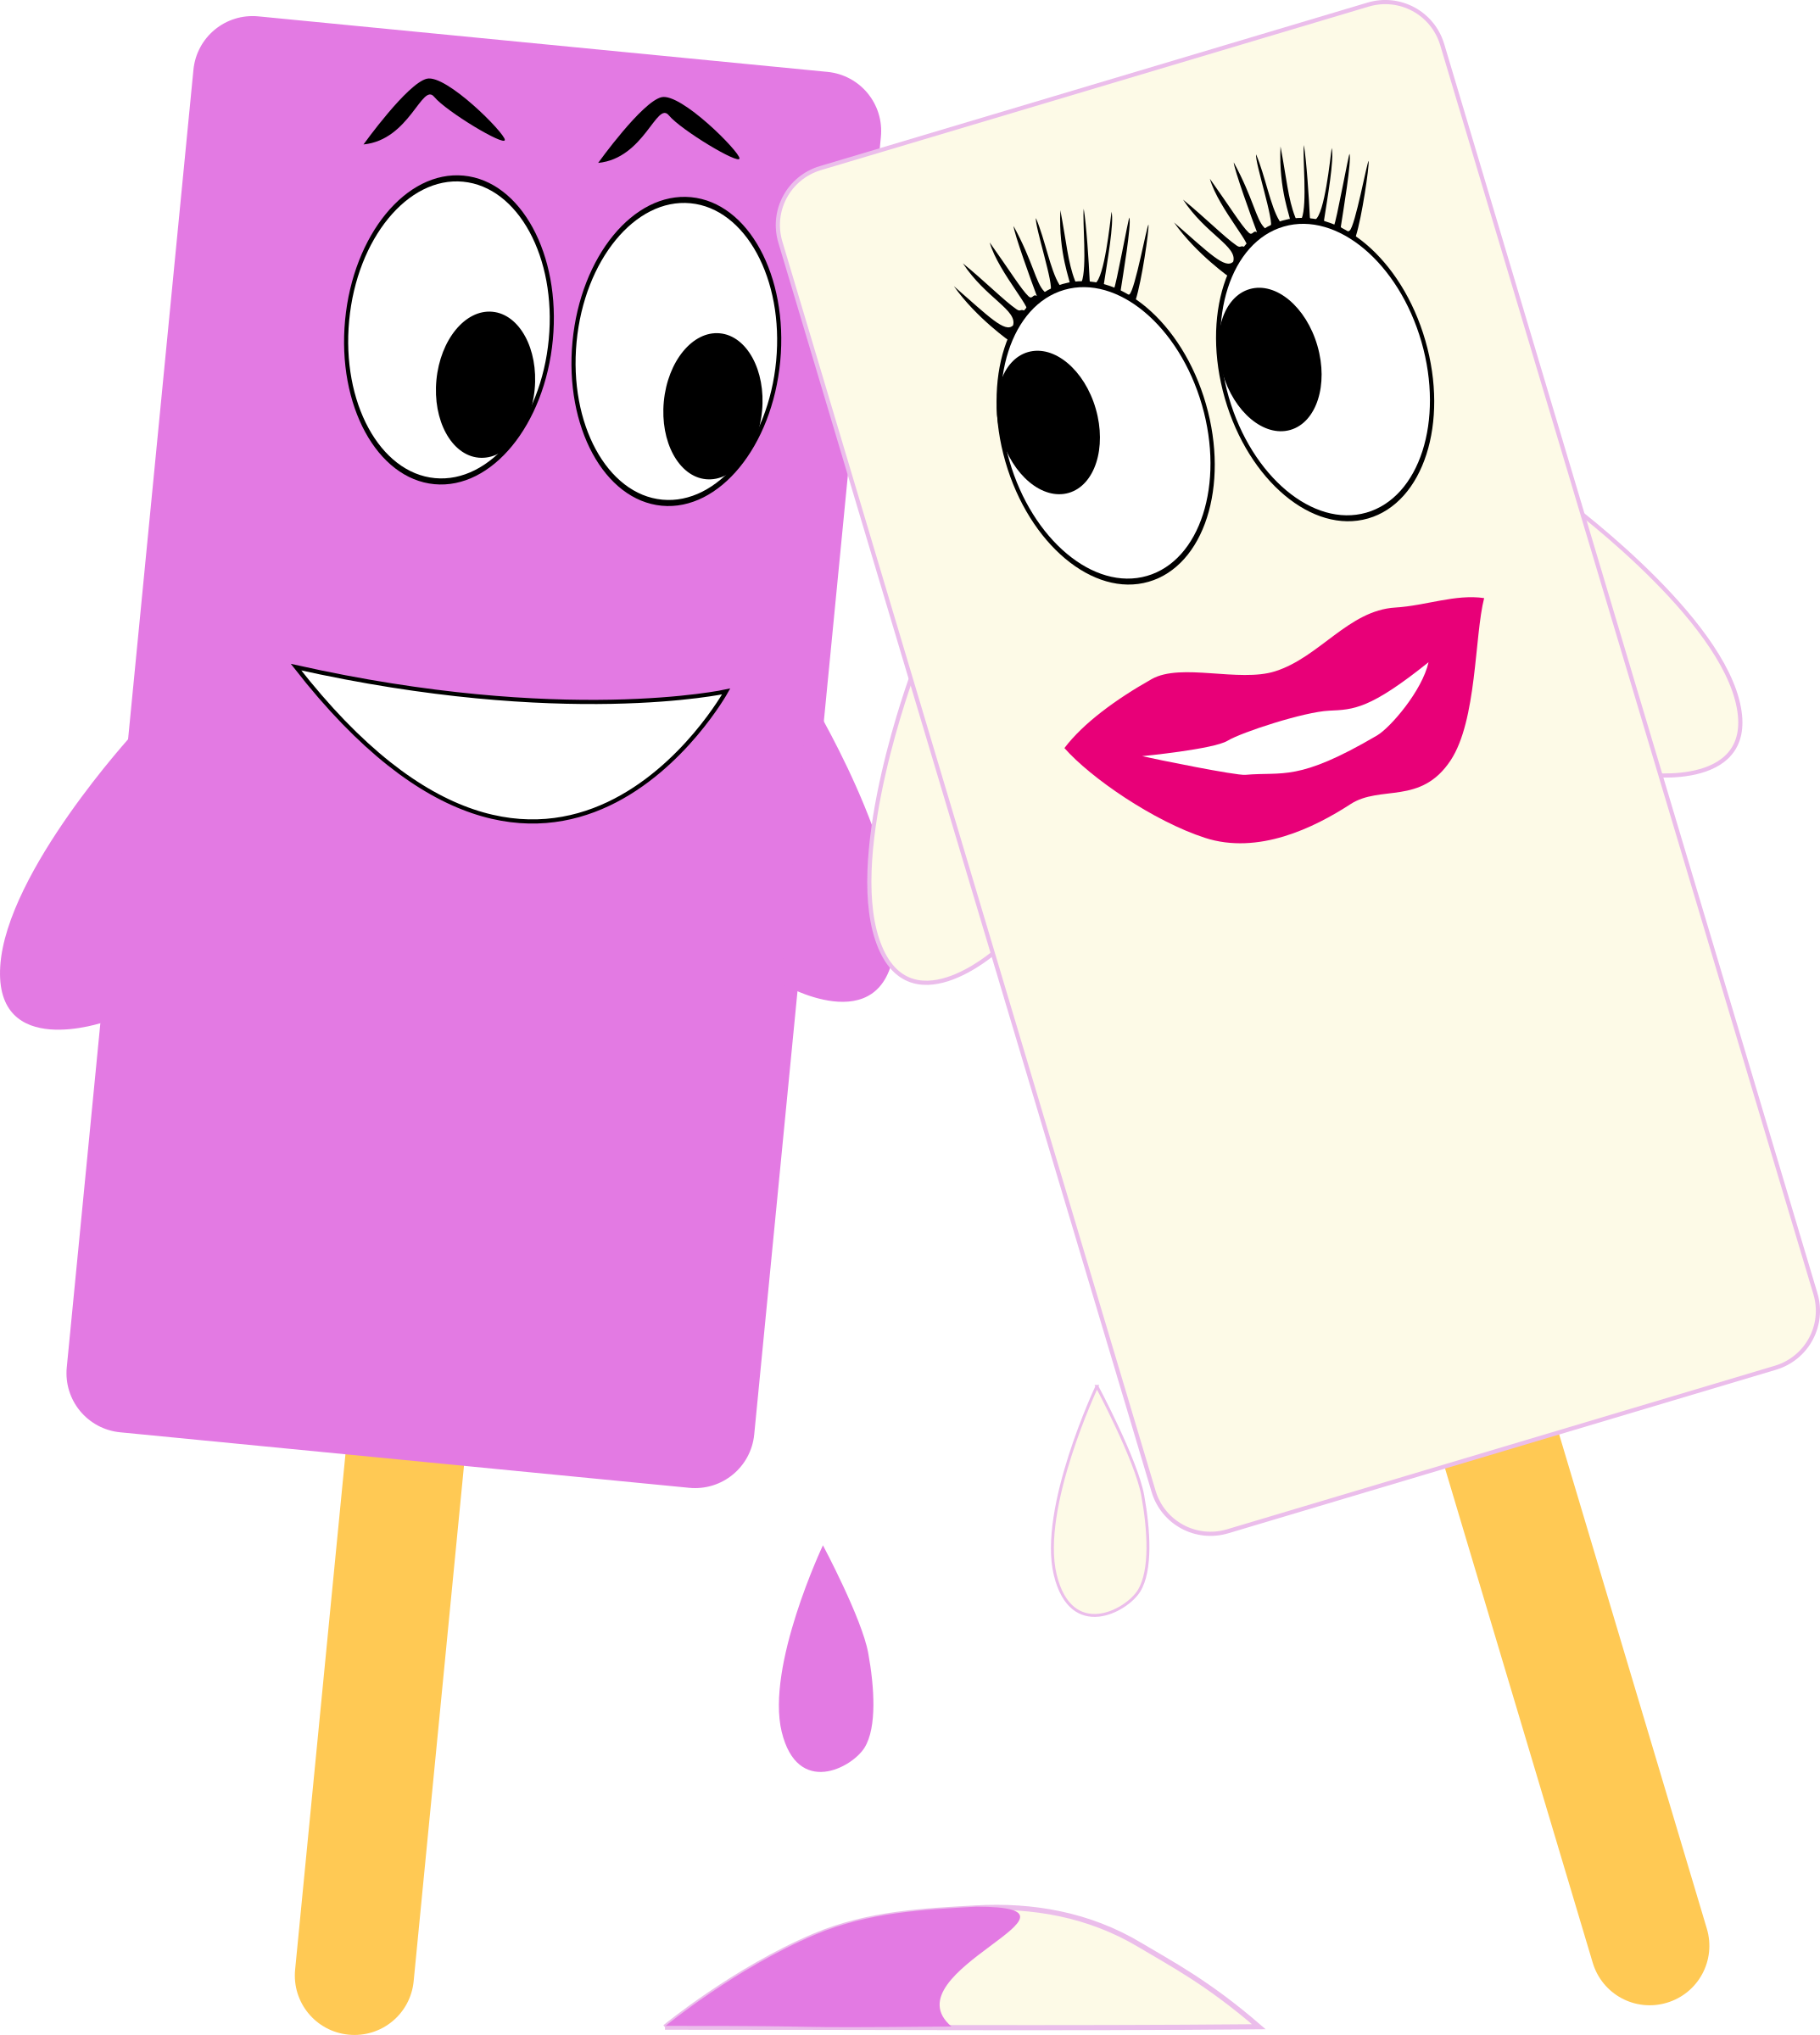 Ice cream girl and boy in love PNG icon